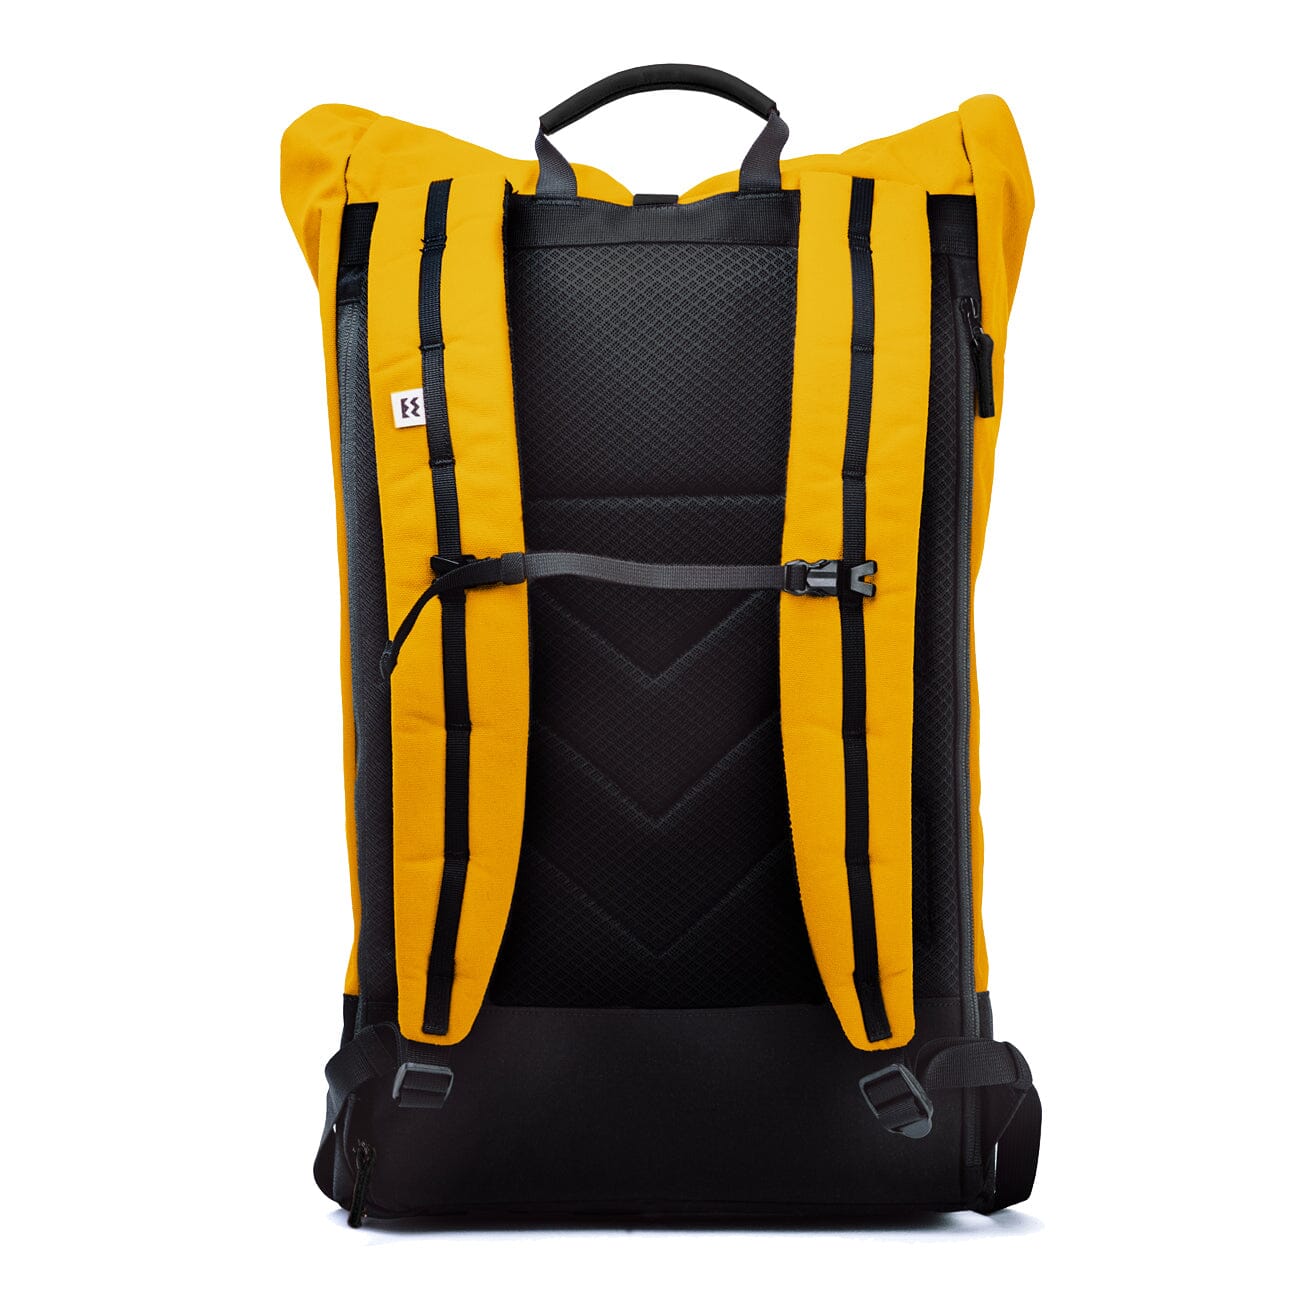 back view of the recycled plastic backpack in yellow color from mero mero brand